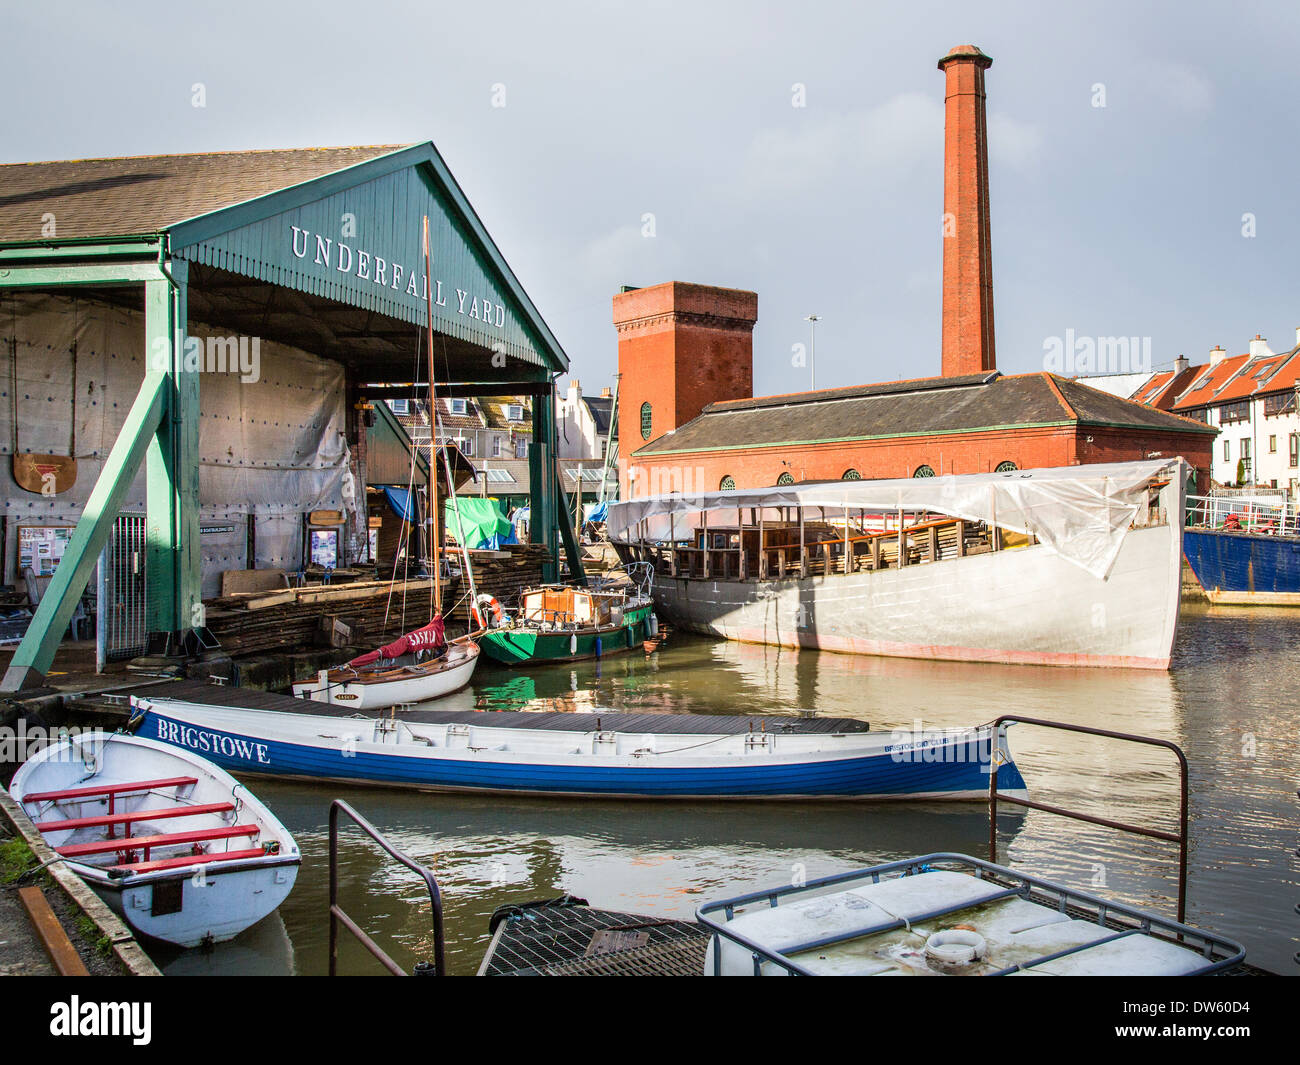 Underfall Yard id a busy boatyard building and repairing mostly wooden sailing boats on the floating harbour in Bristol UK Stock Photo